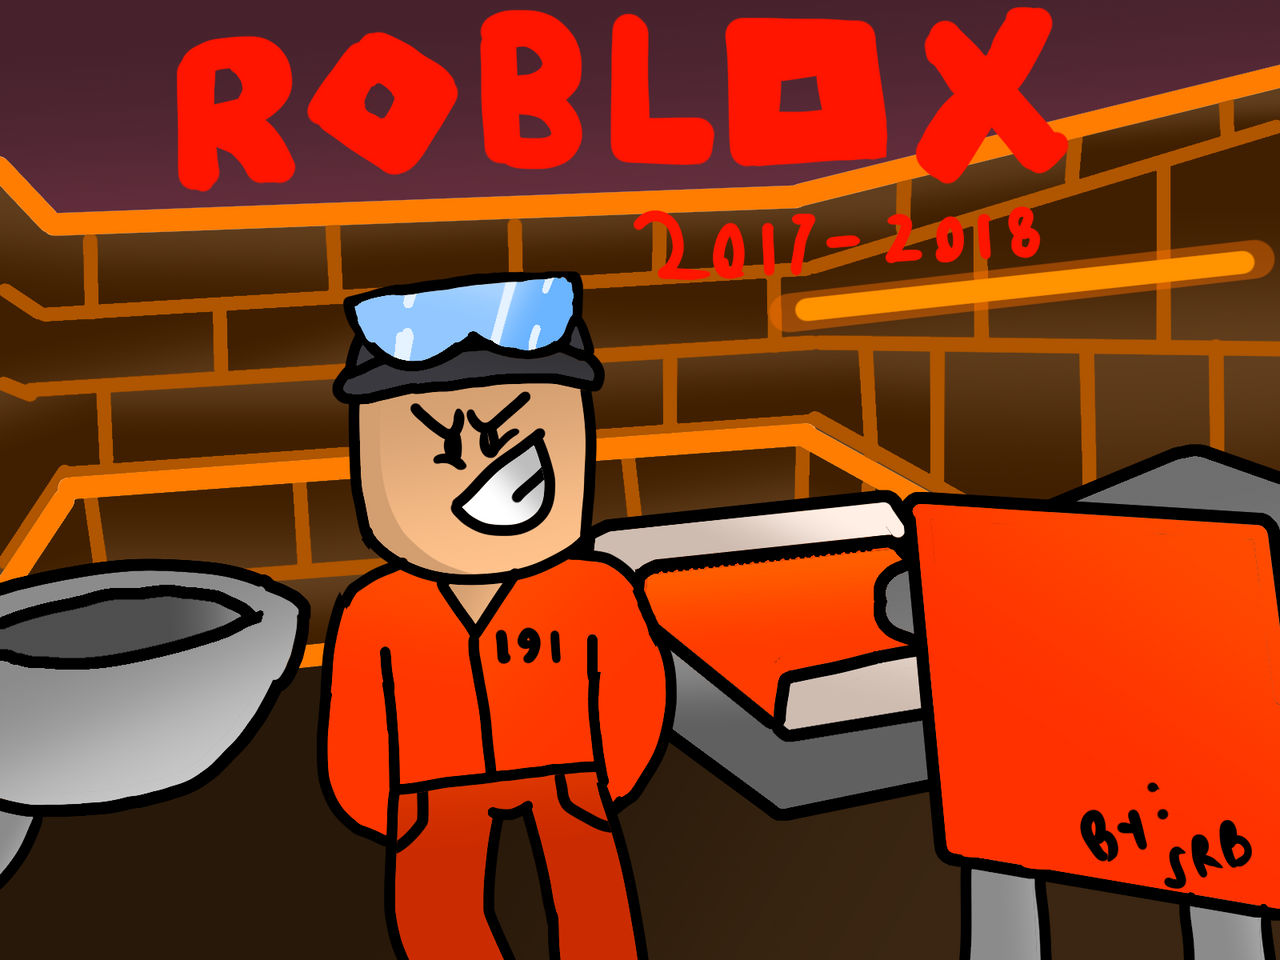 I HAVE ROBLOX by flowerbfb739 on DeviantArt